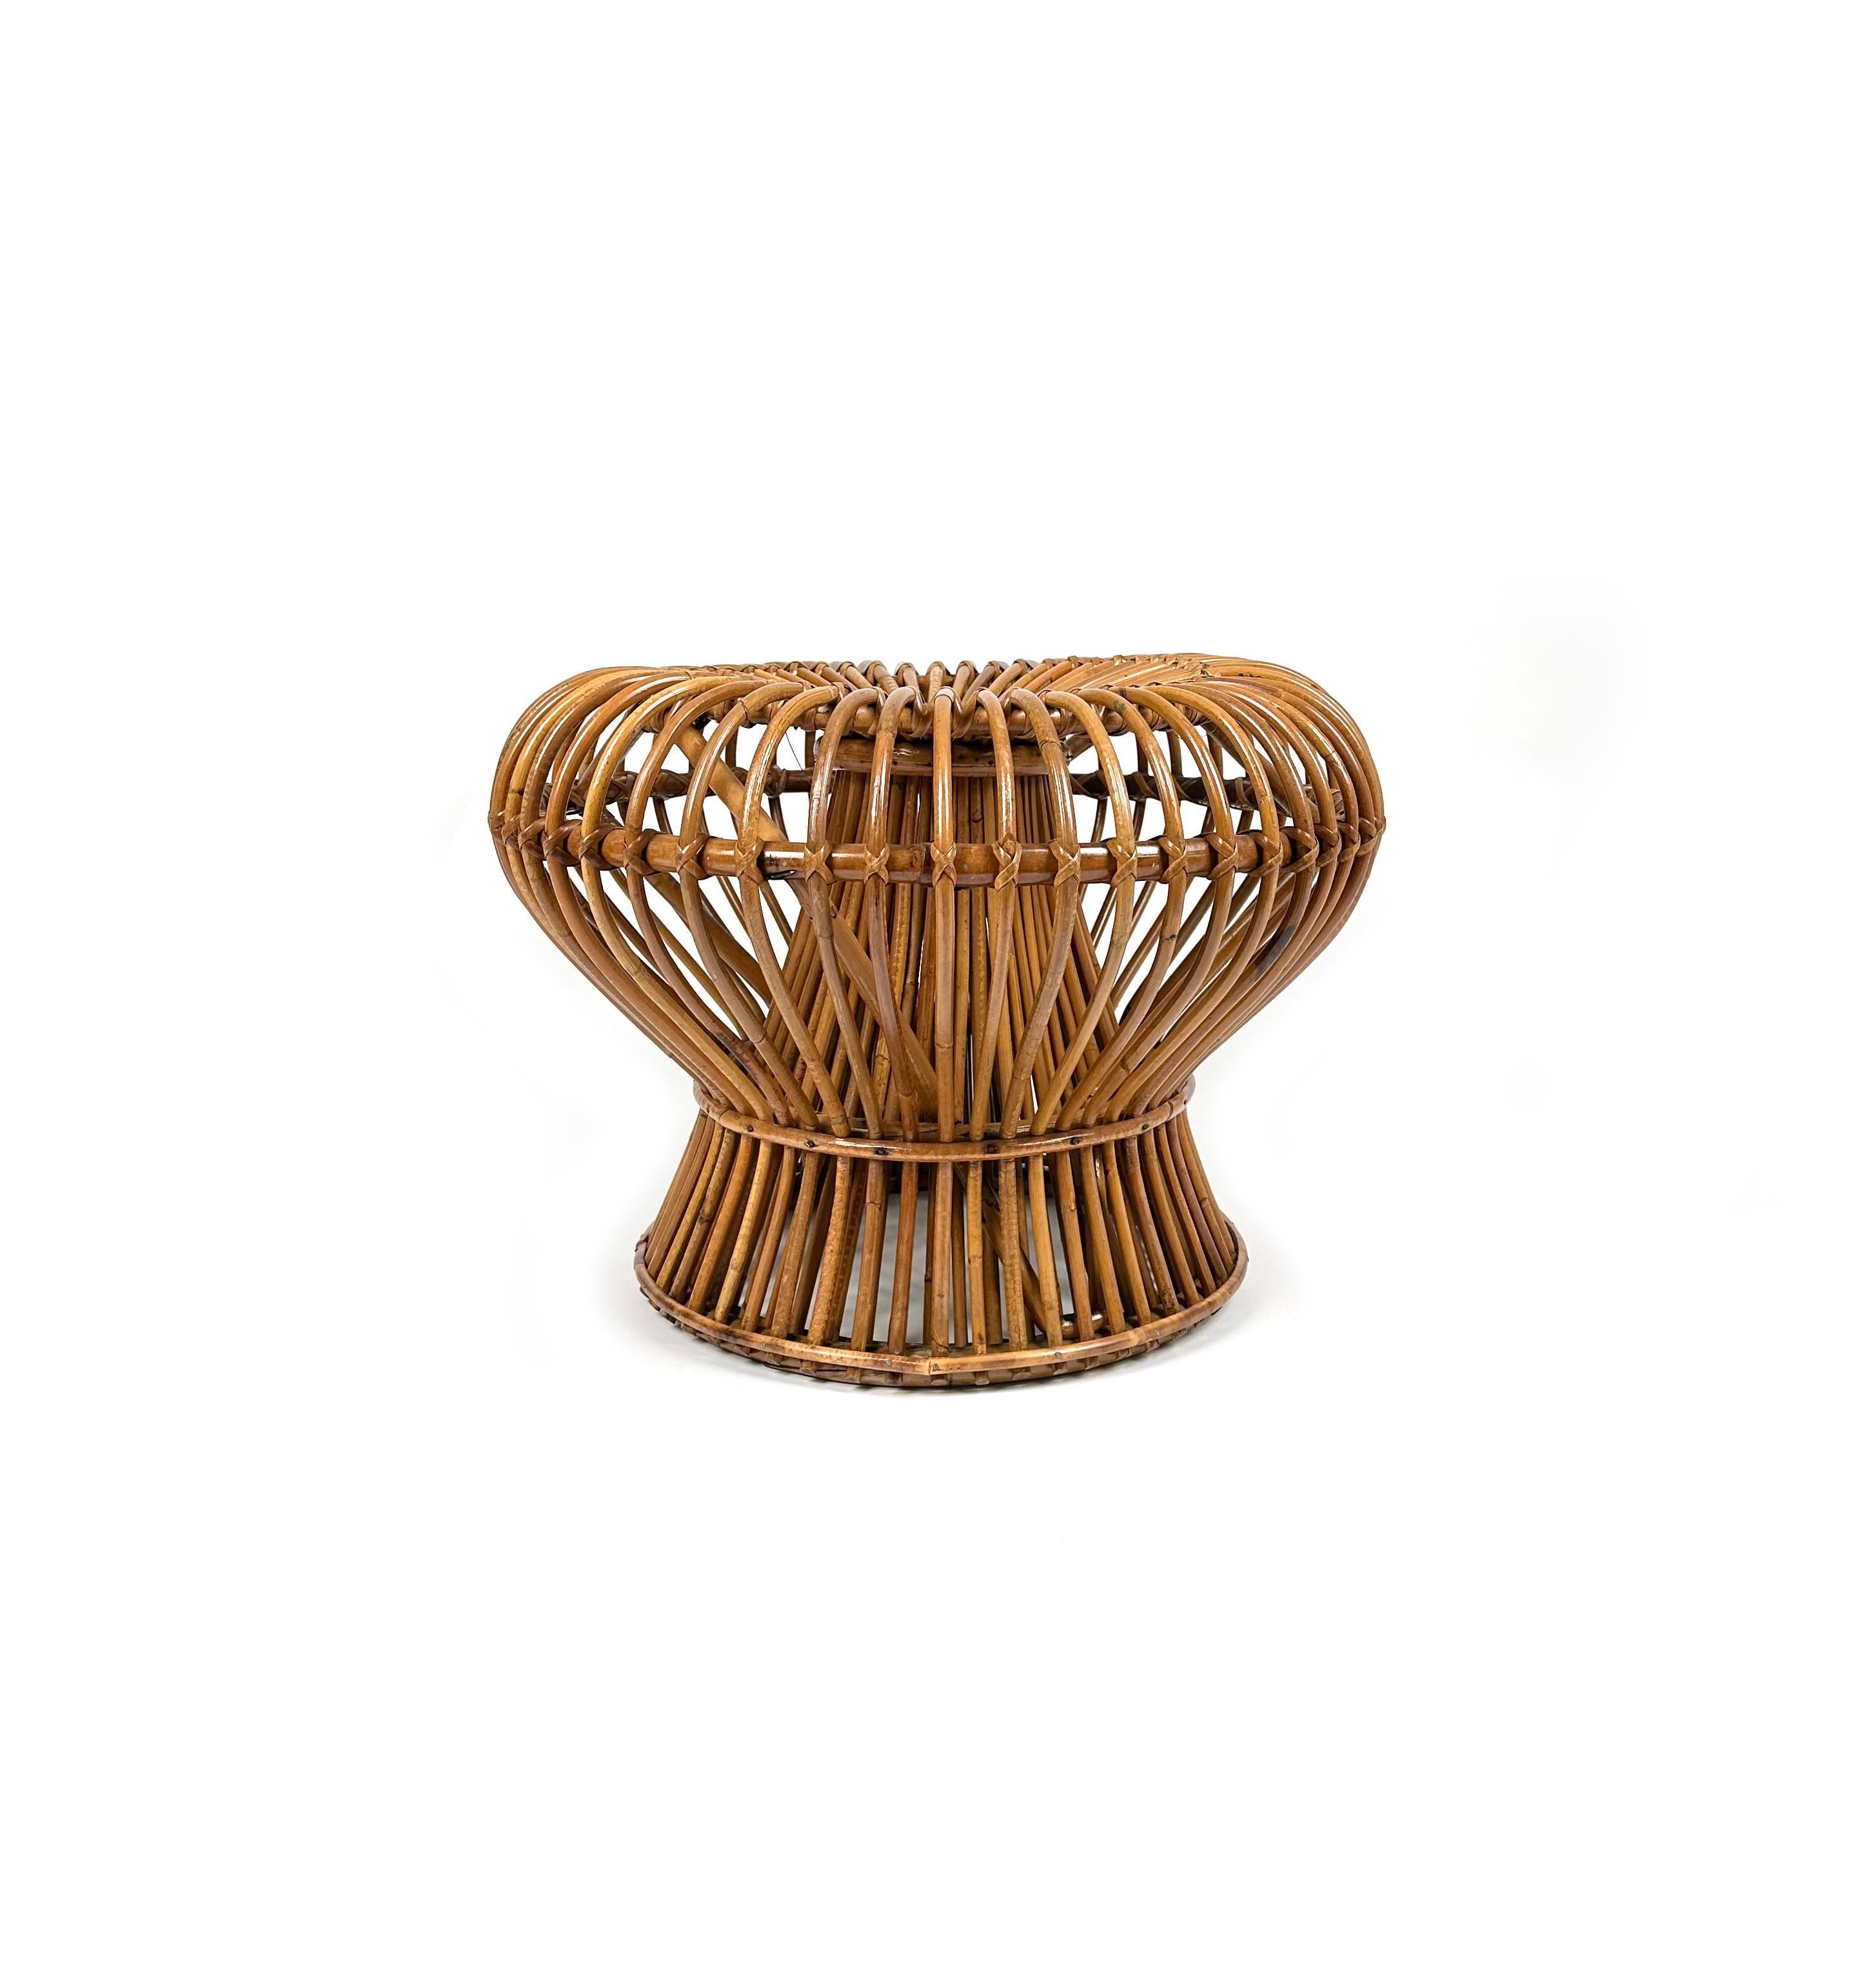 Mid-Century Modern Midcentury Ottoman Stool in Bamboo and Rattan Franco Albini Style, Italy, 1960s For Sale